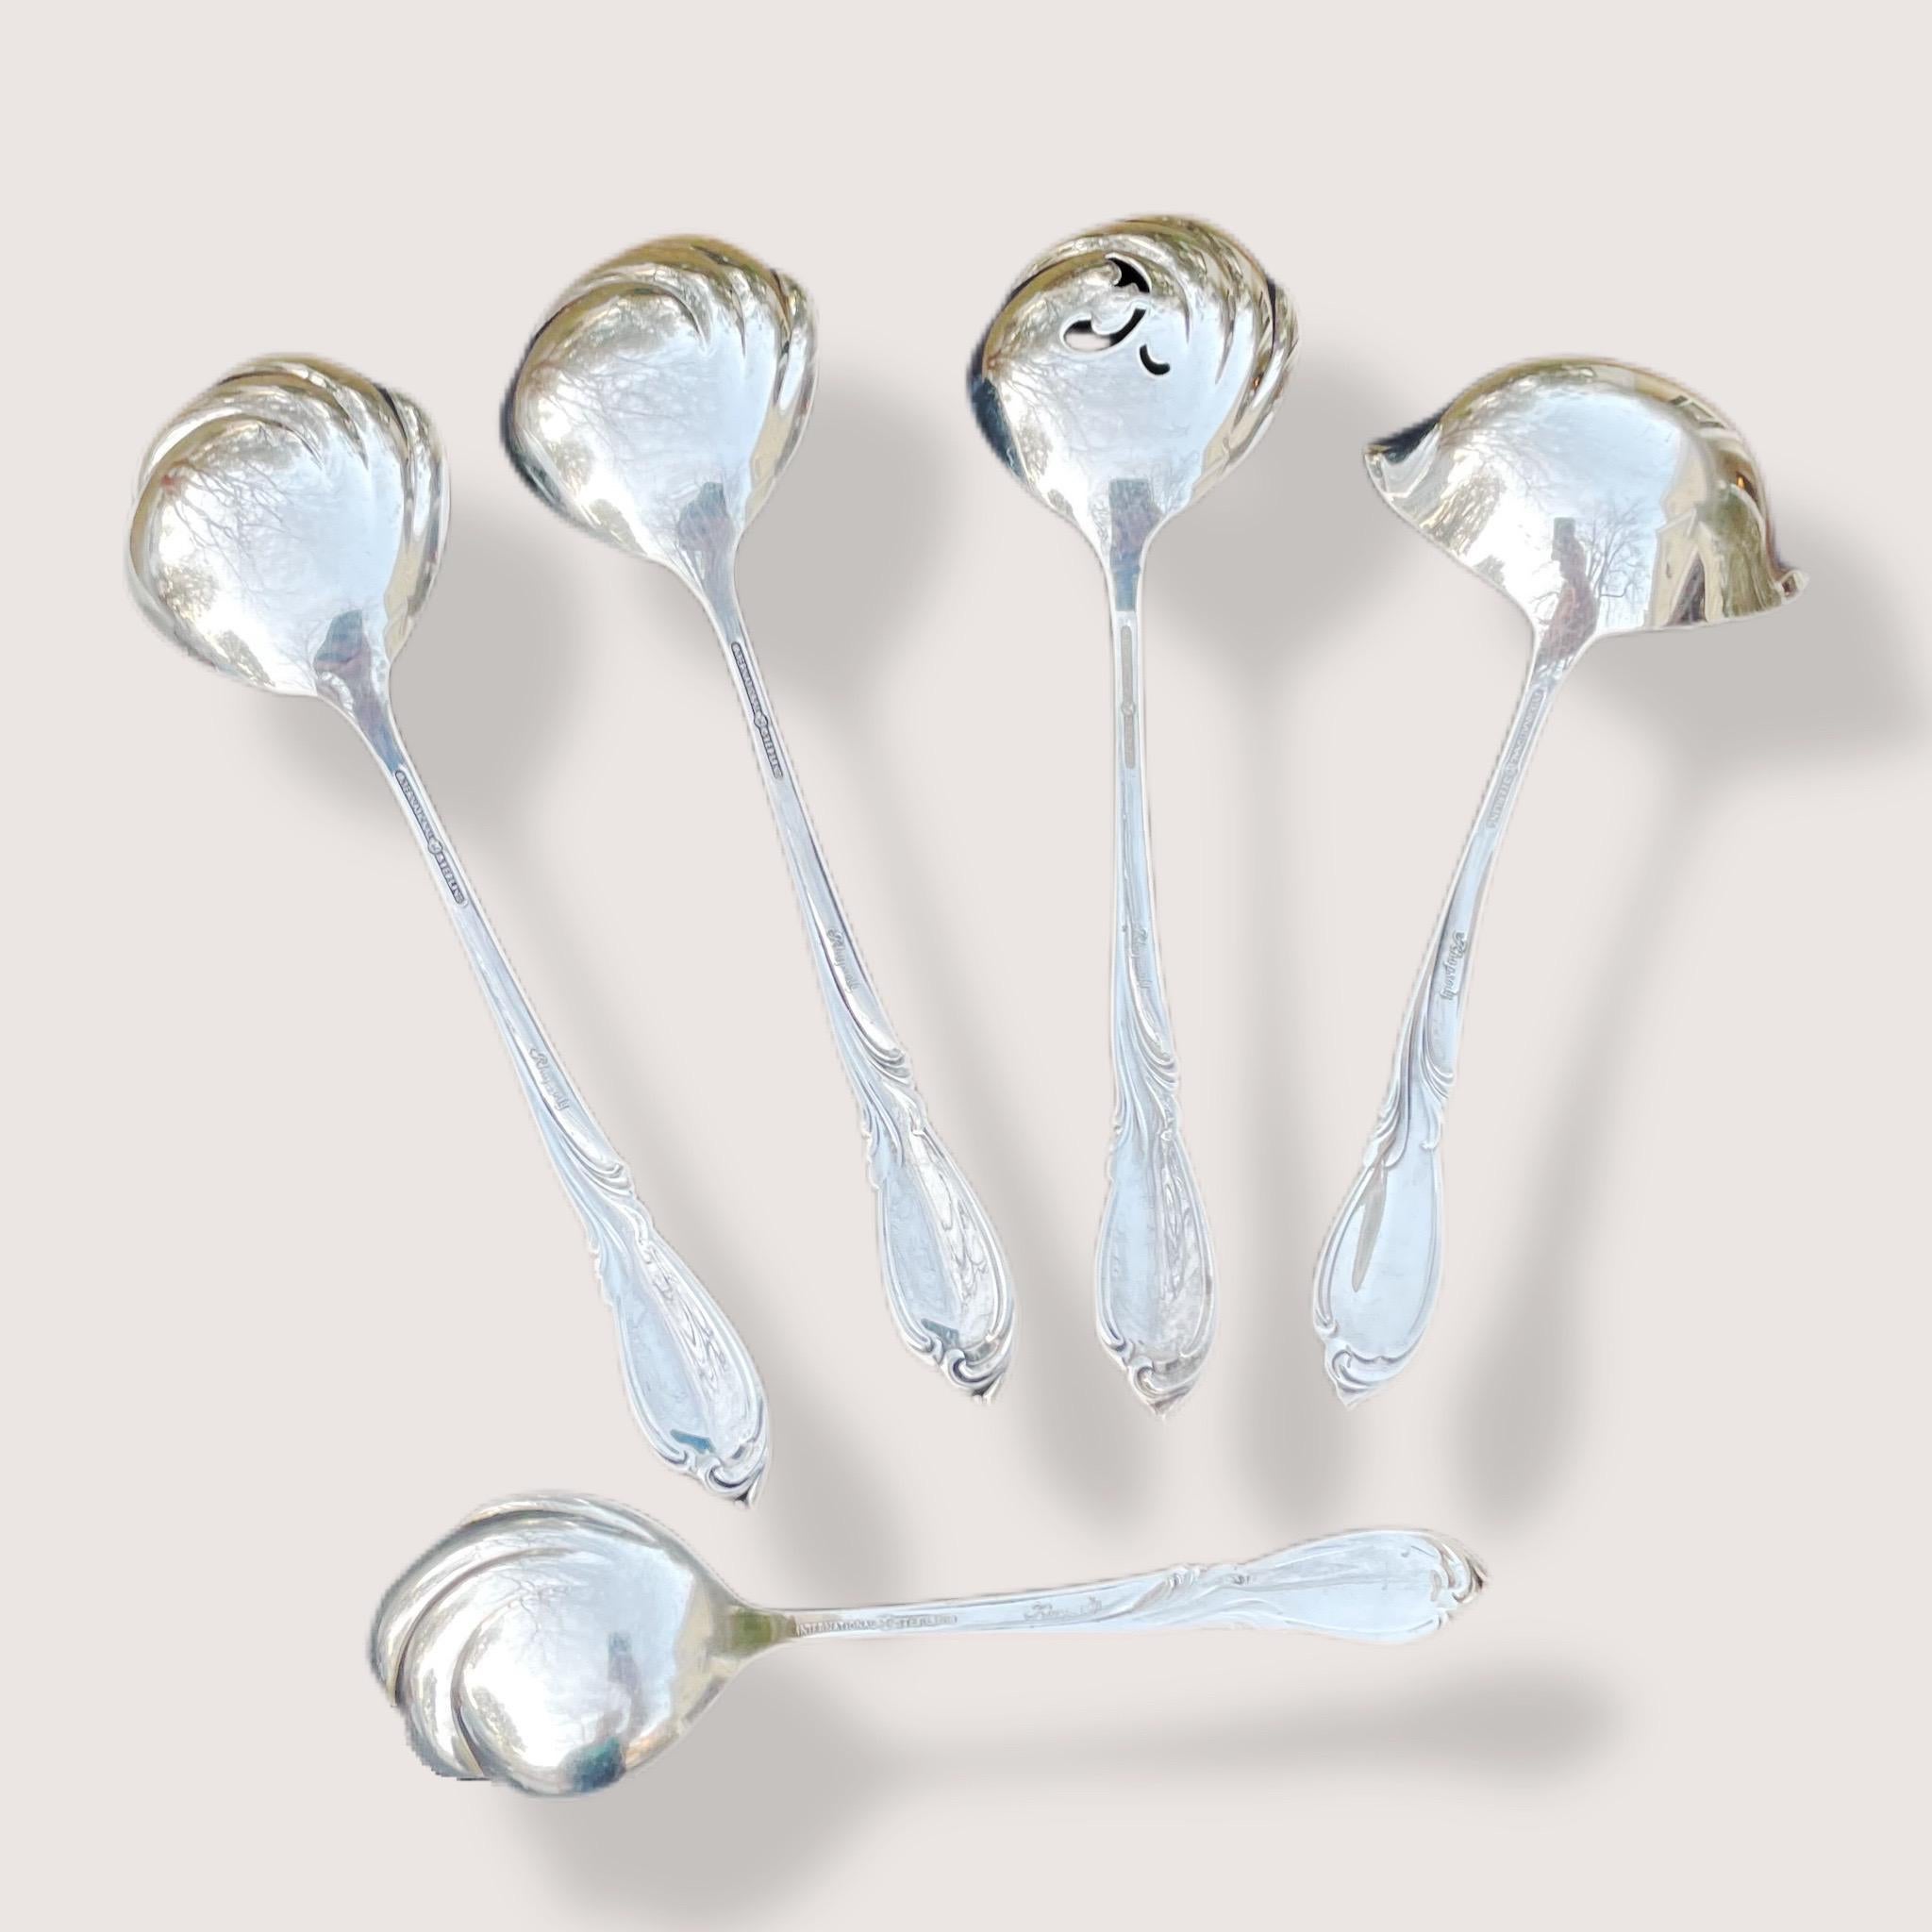 Other Mid Century International Sterling Silver Rhapsody Serving Utensils Set of 5 For Sale